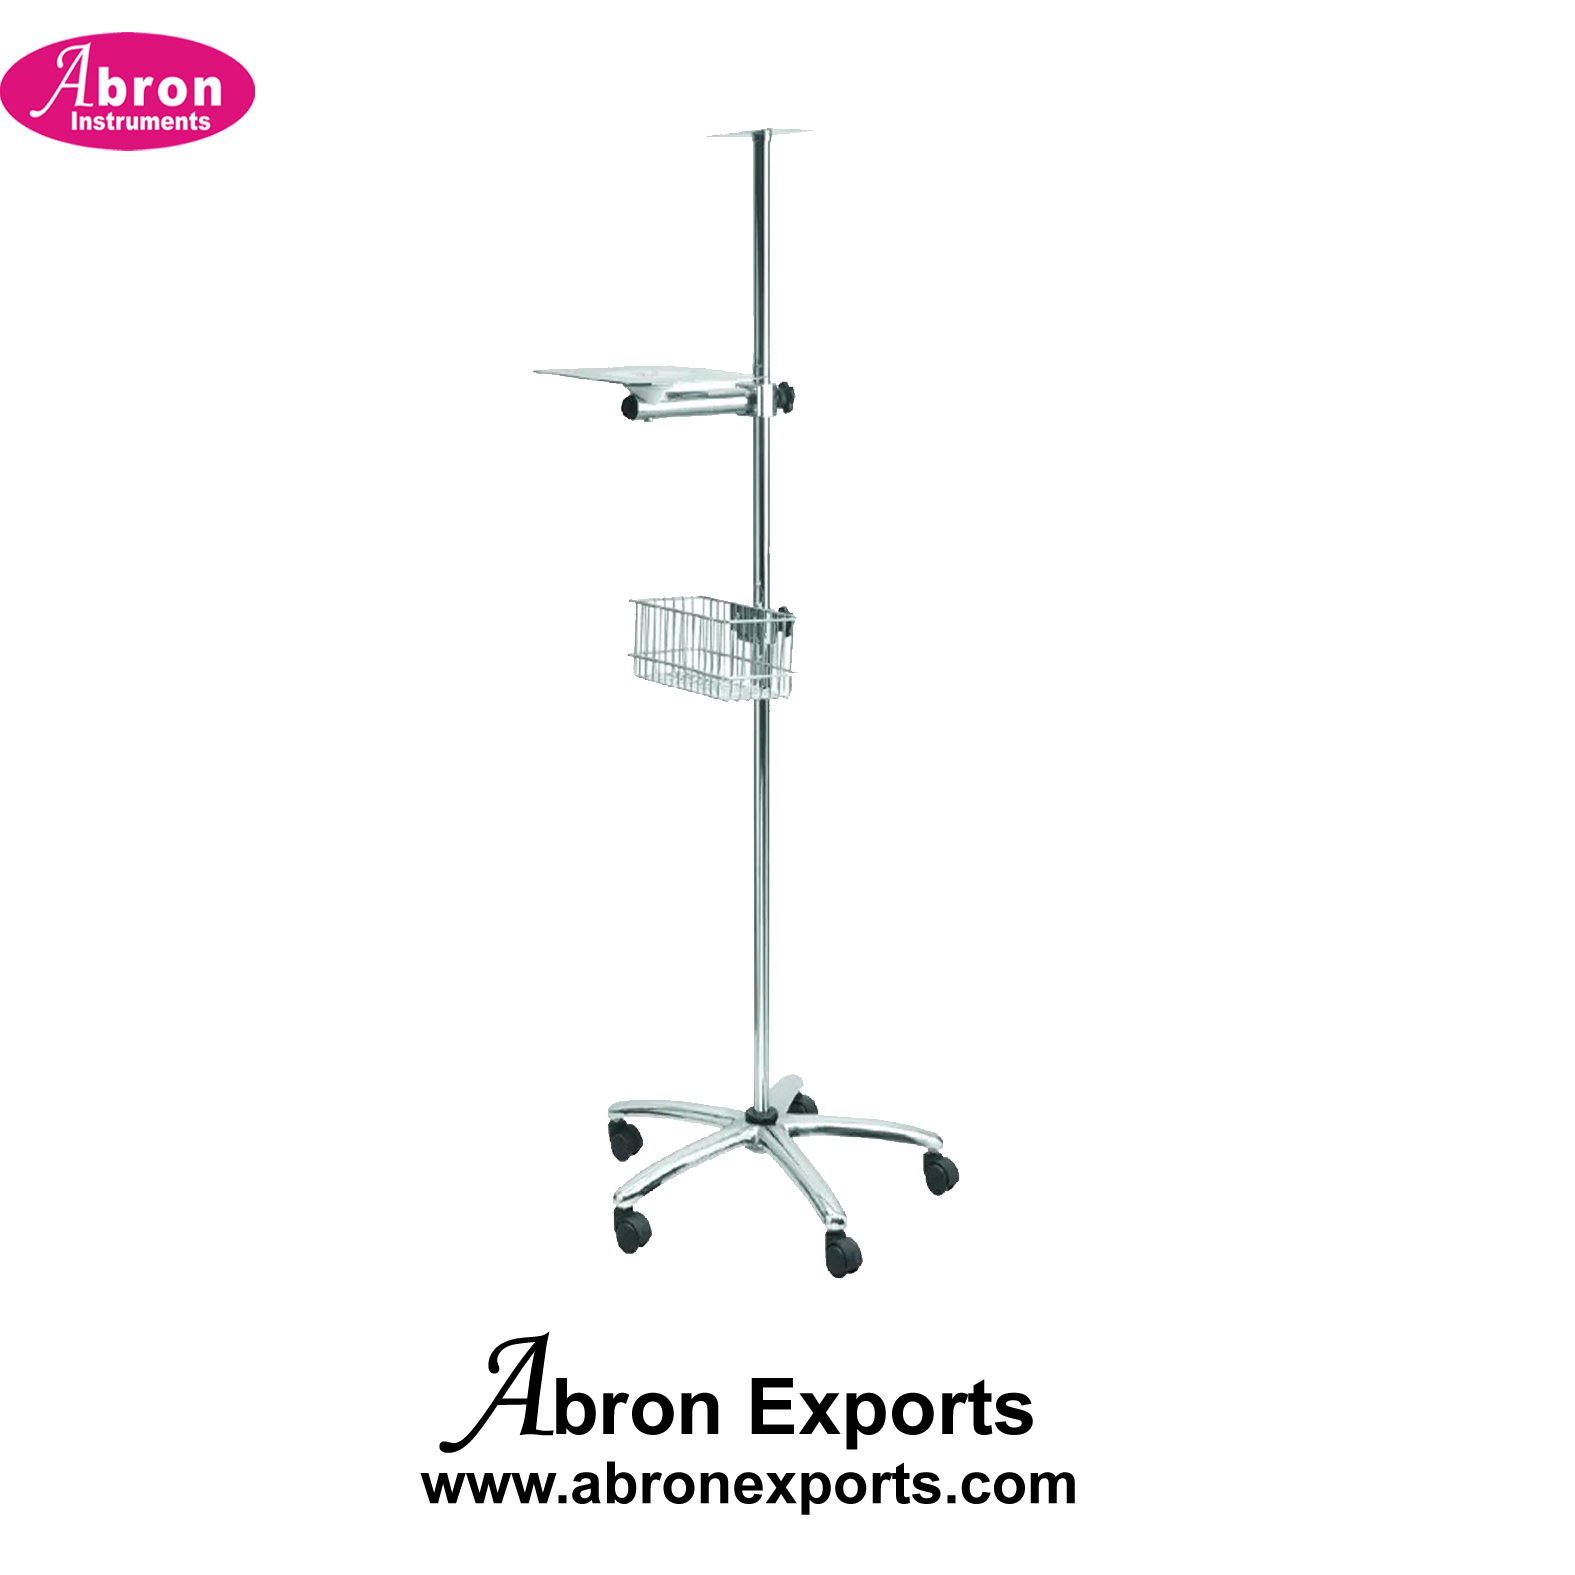 Patient Monitor ECG LCD Trolley roll Stand with wheels Hospital Nursing Home Abron ABM-2552STW 